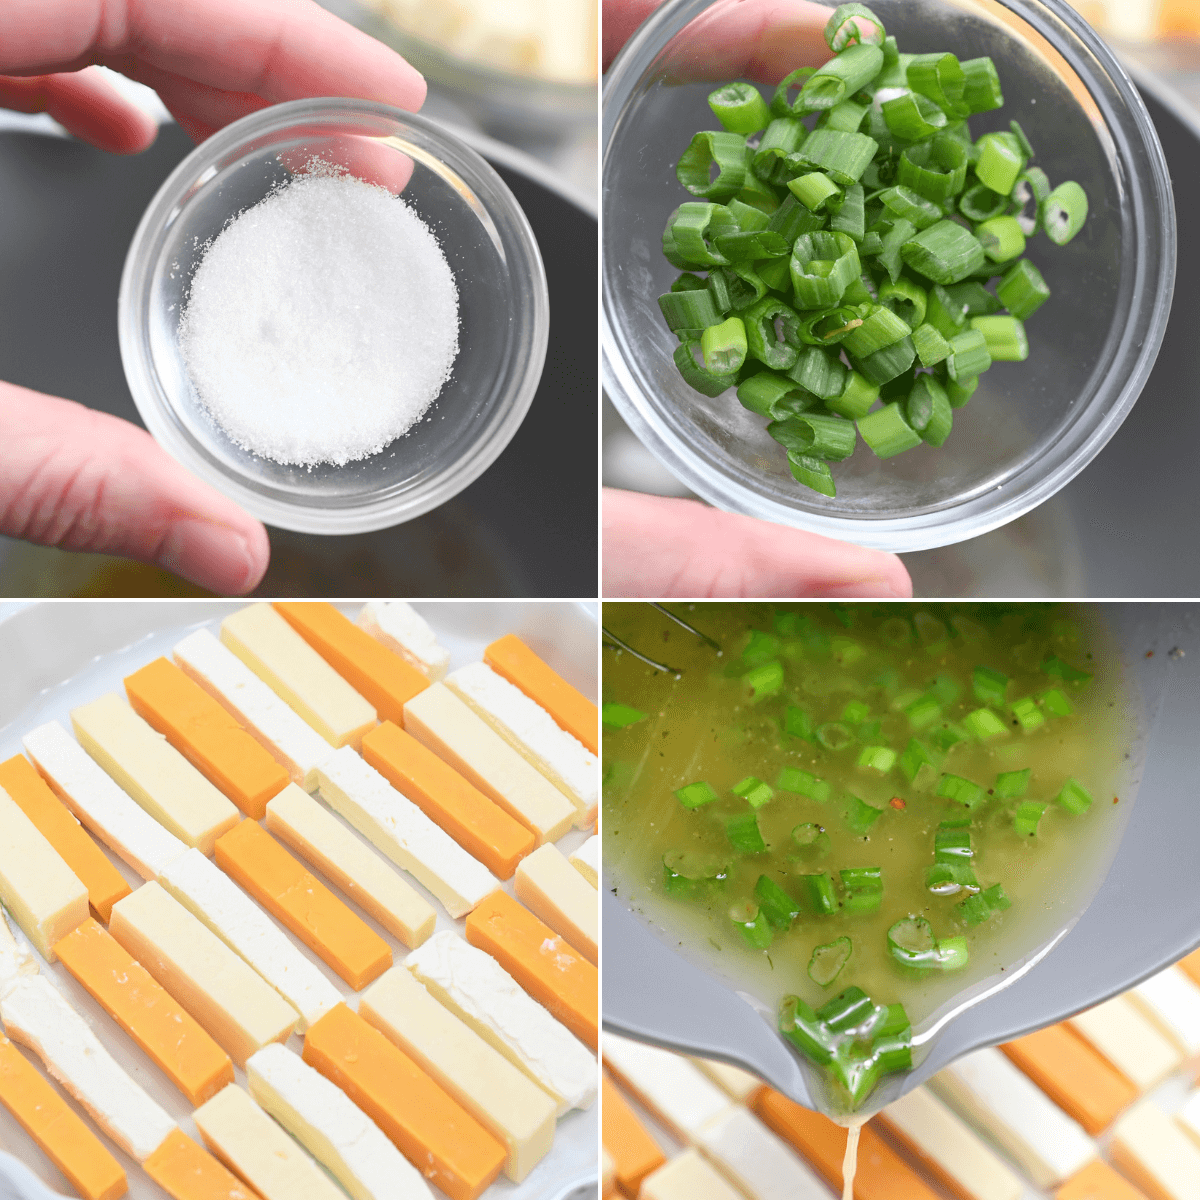 A series of photos illustrating the process of preparing a dish with marinated cheese and green onions.